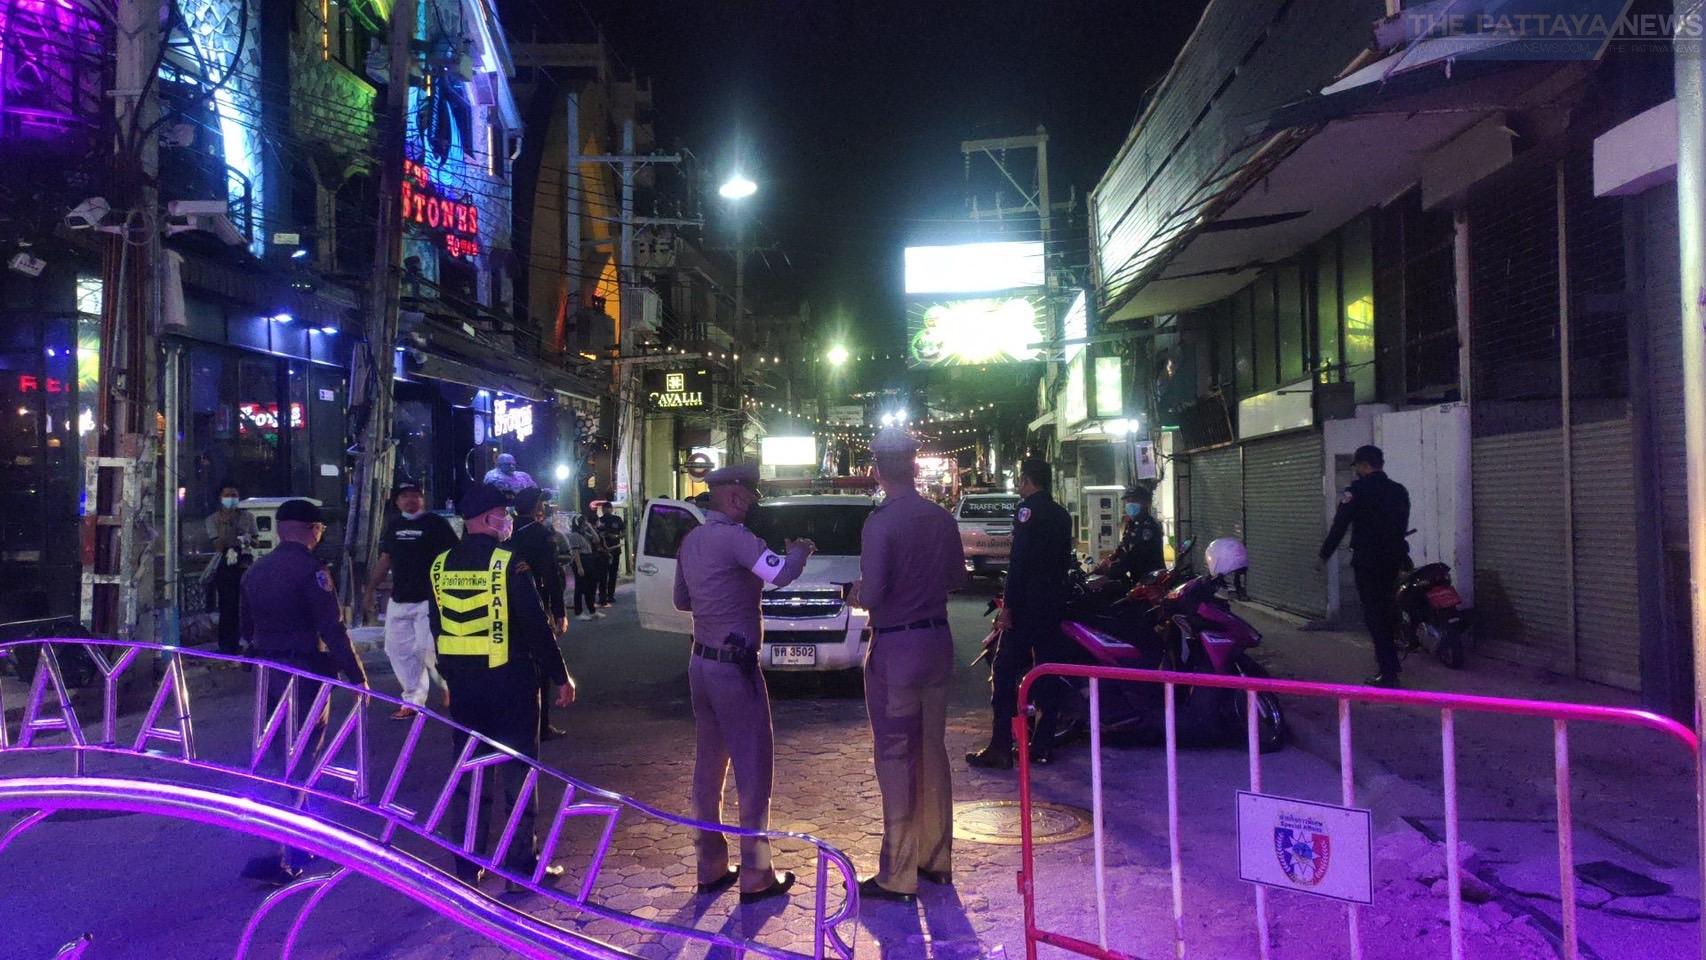 Video: High ranking police officials discuss allowing Pattaya to legally stay open late once again